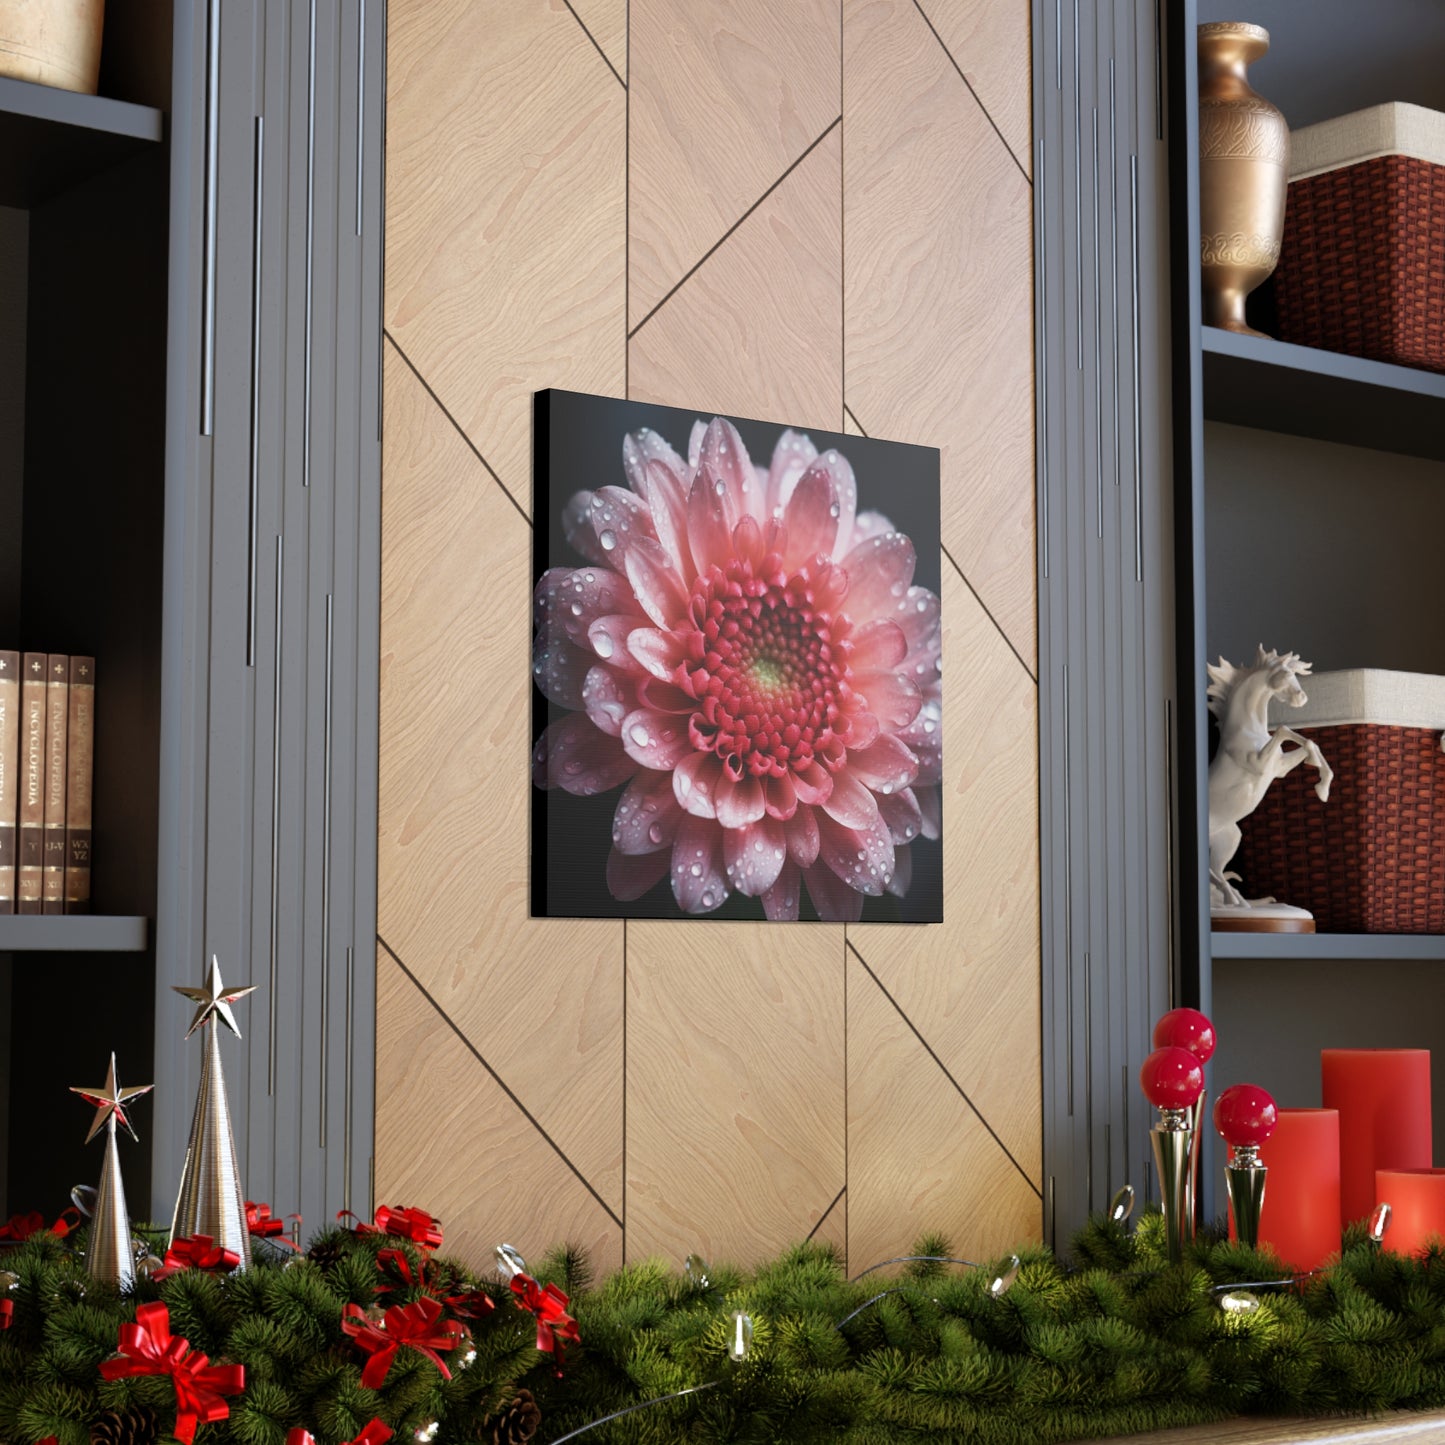 "Beautiful Pink Flower Up Close" Wall Art - Weave Got Gifts - Unique Gifts You Won’t Find Anywhere Else!